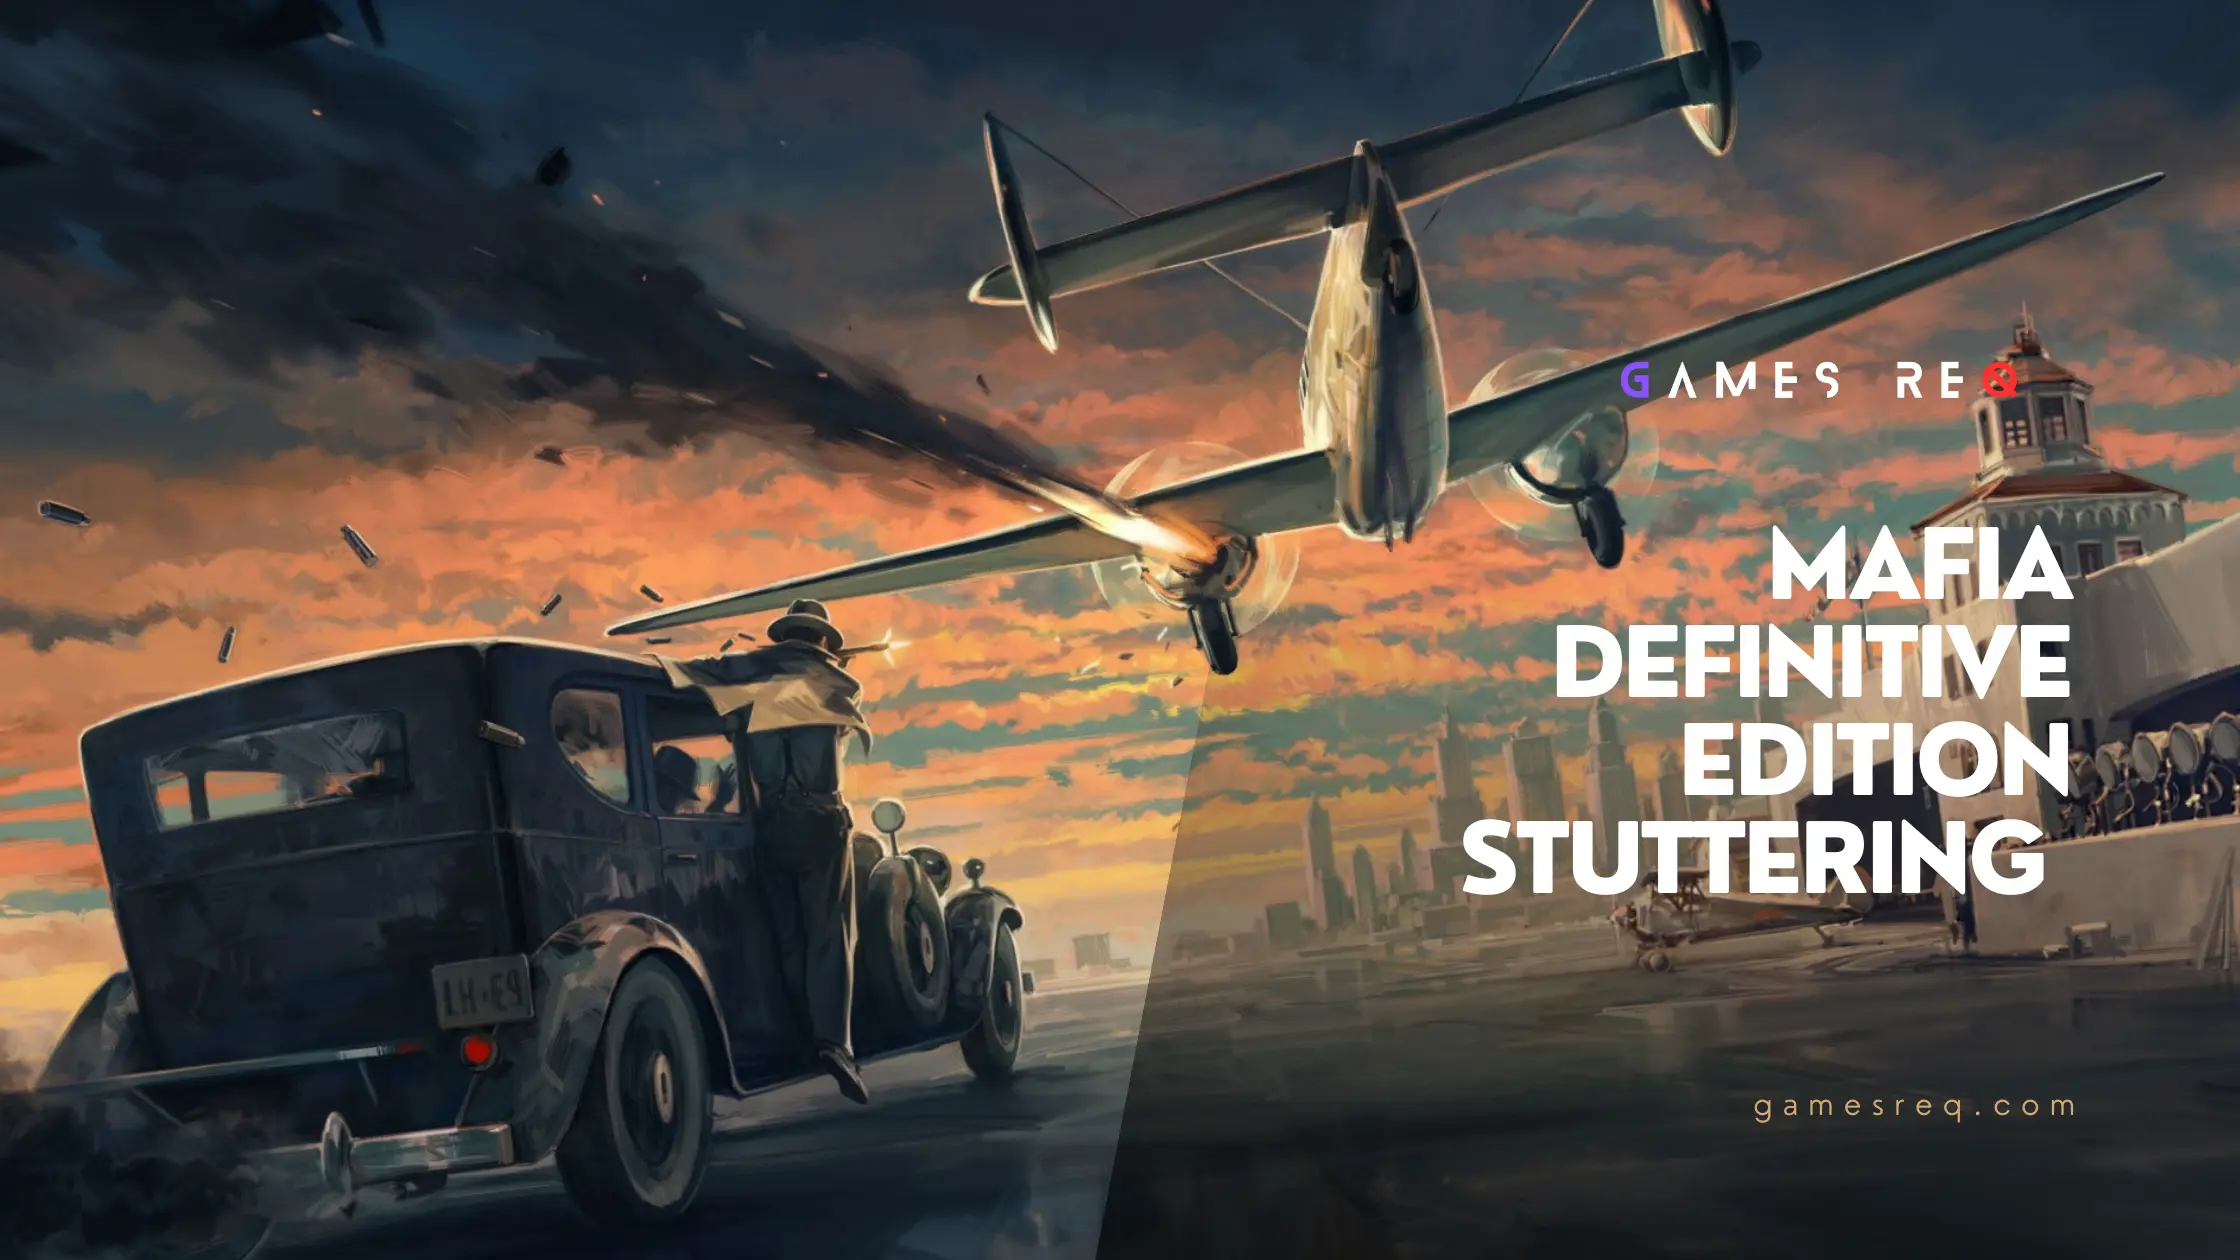 Mafia Definitive Edition Stuttering Fixing Stuttering Issues